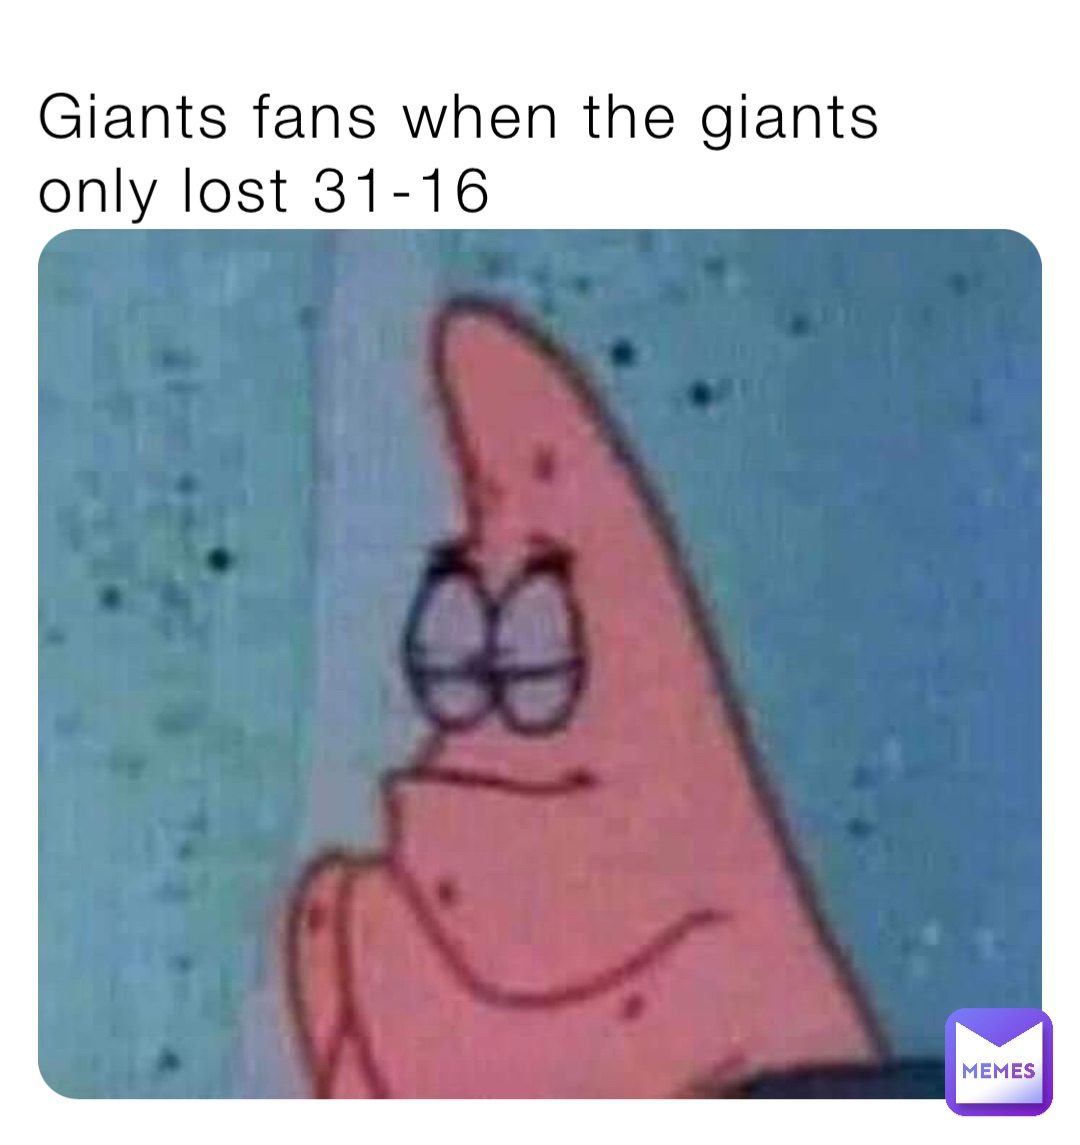 Giants fans when the giants only lost 31-16